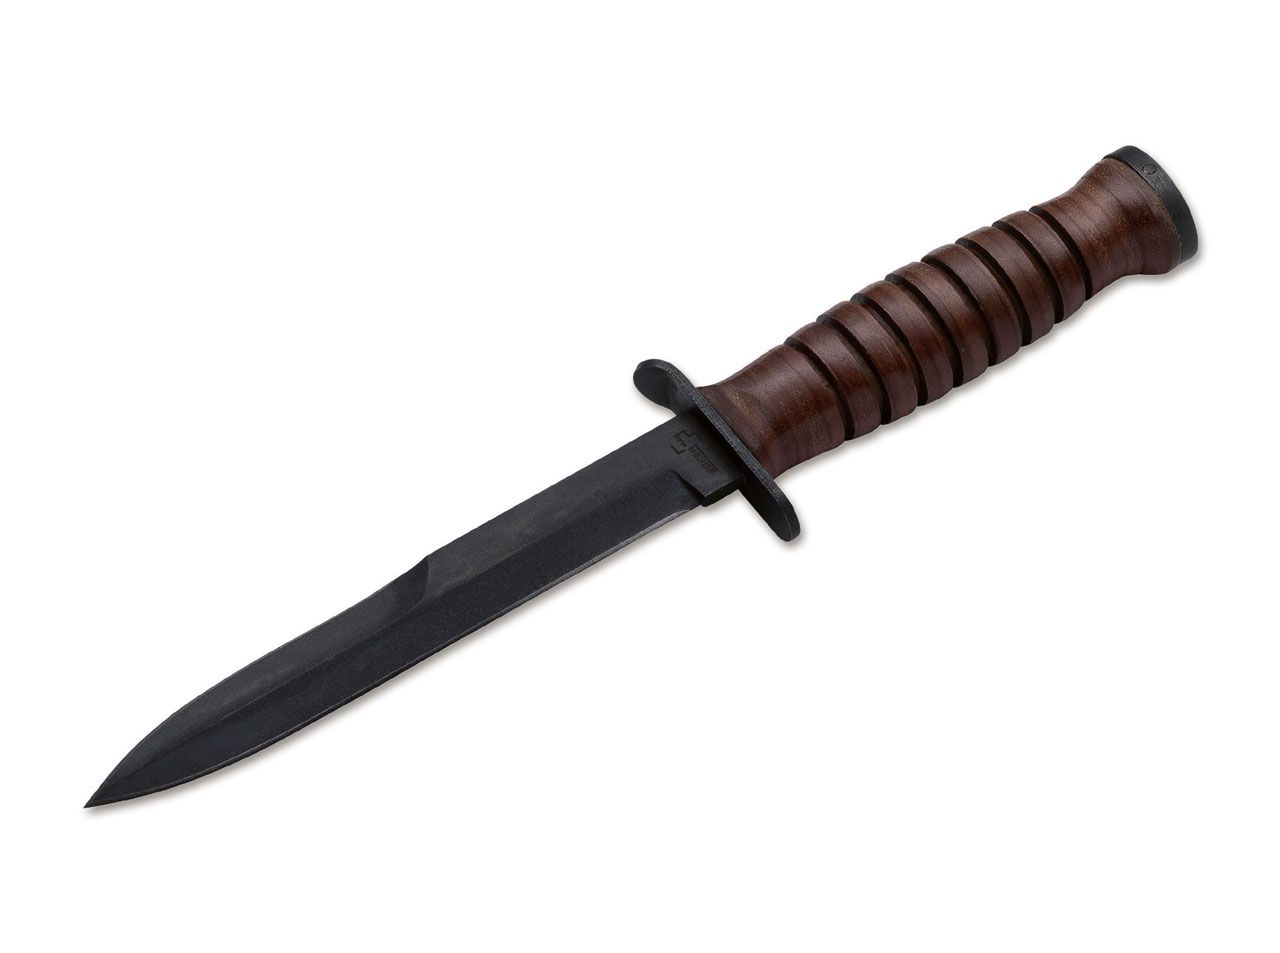 Plus M3 Trench Knife